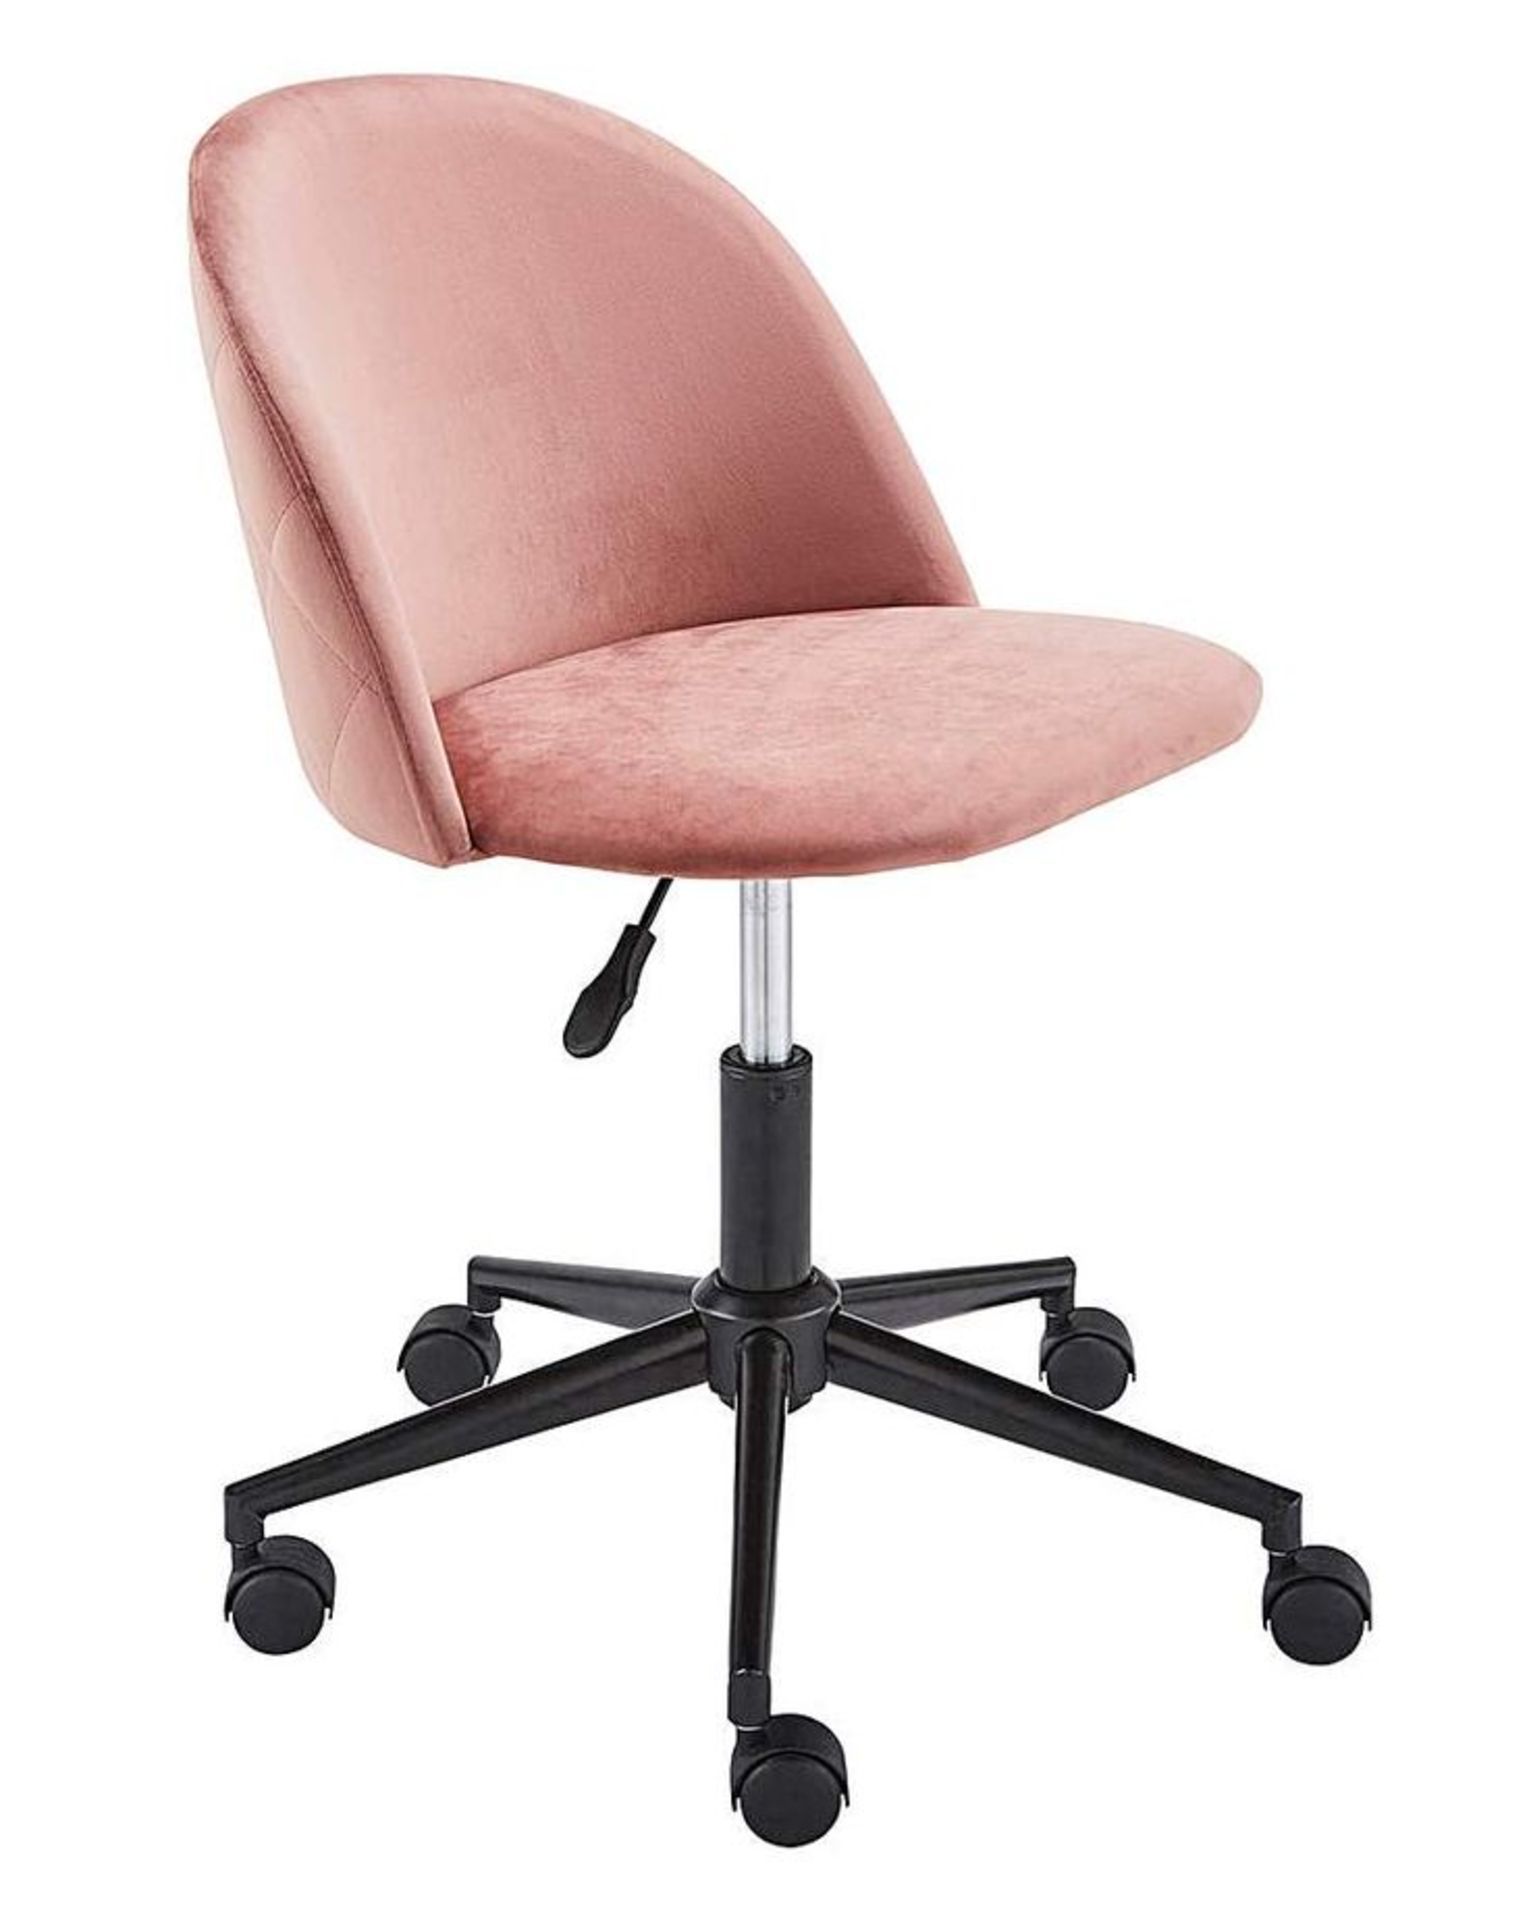 Brand New & Boxed Klara Office Chair - Blush. RRP £199 each. The Klara Office Chair is a luxurious - Image 2 of 2